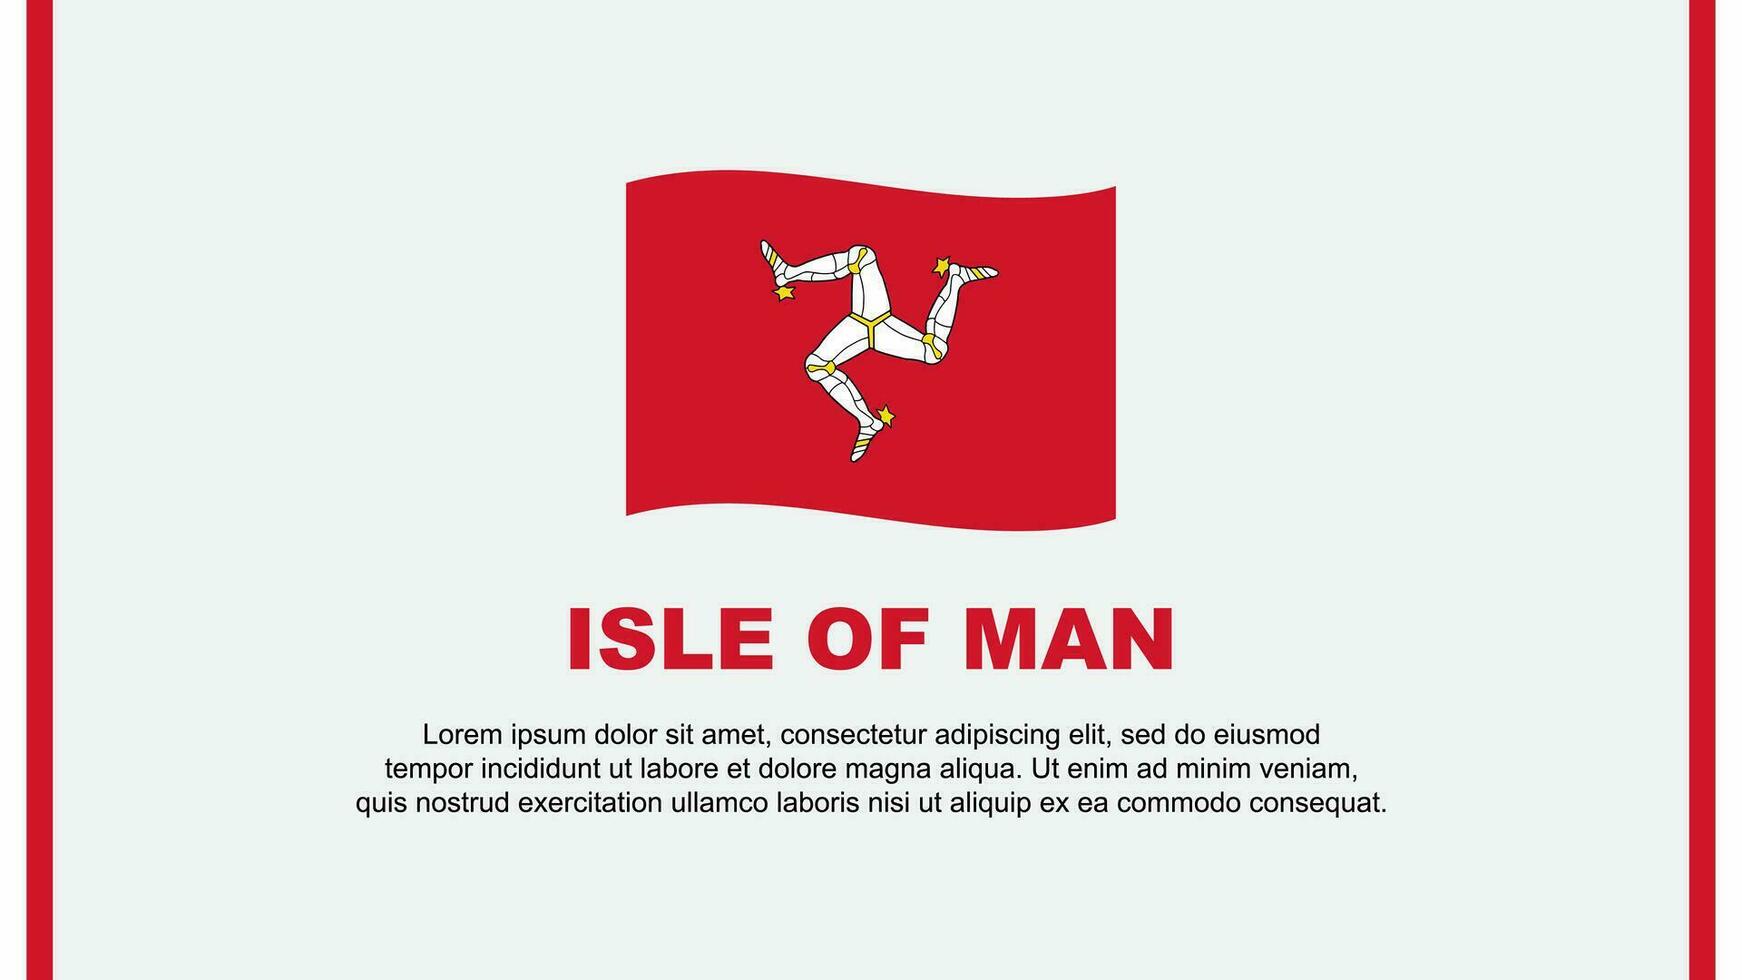 Isle Of Man Flag Abstract Background Design Template. Isle Of Man Independence Day Banner Social Media Vector Illustration. Isle Of Man Cartoon